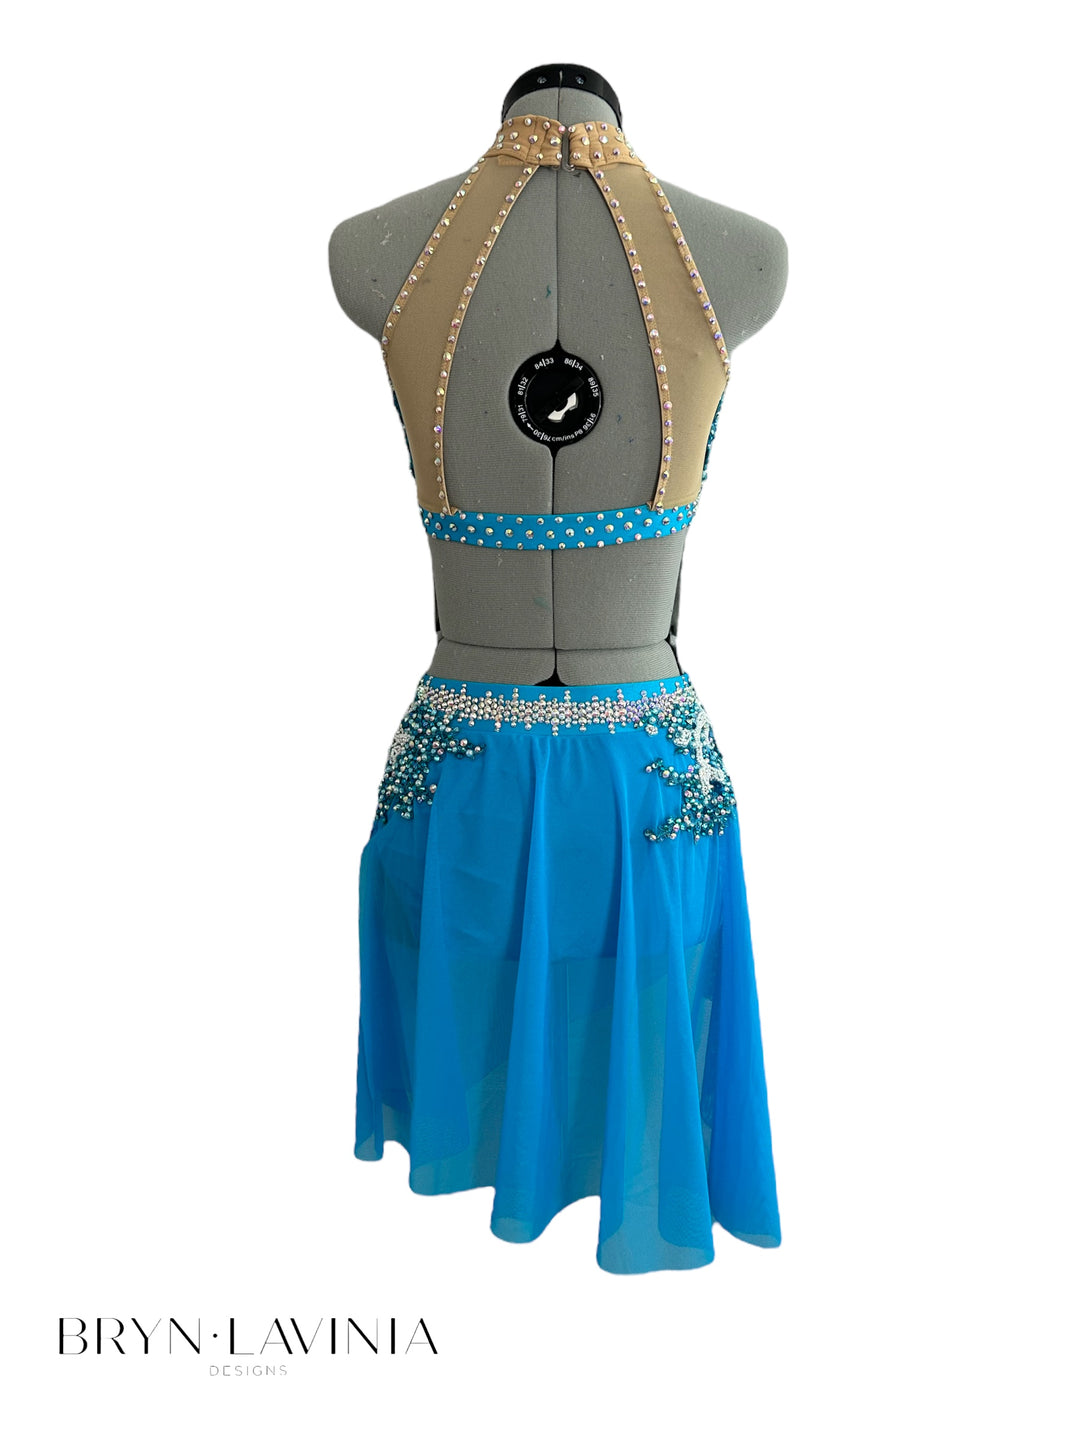 NEW AXS Turquoise ready to ship costume